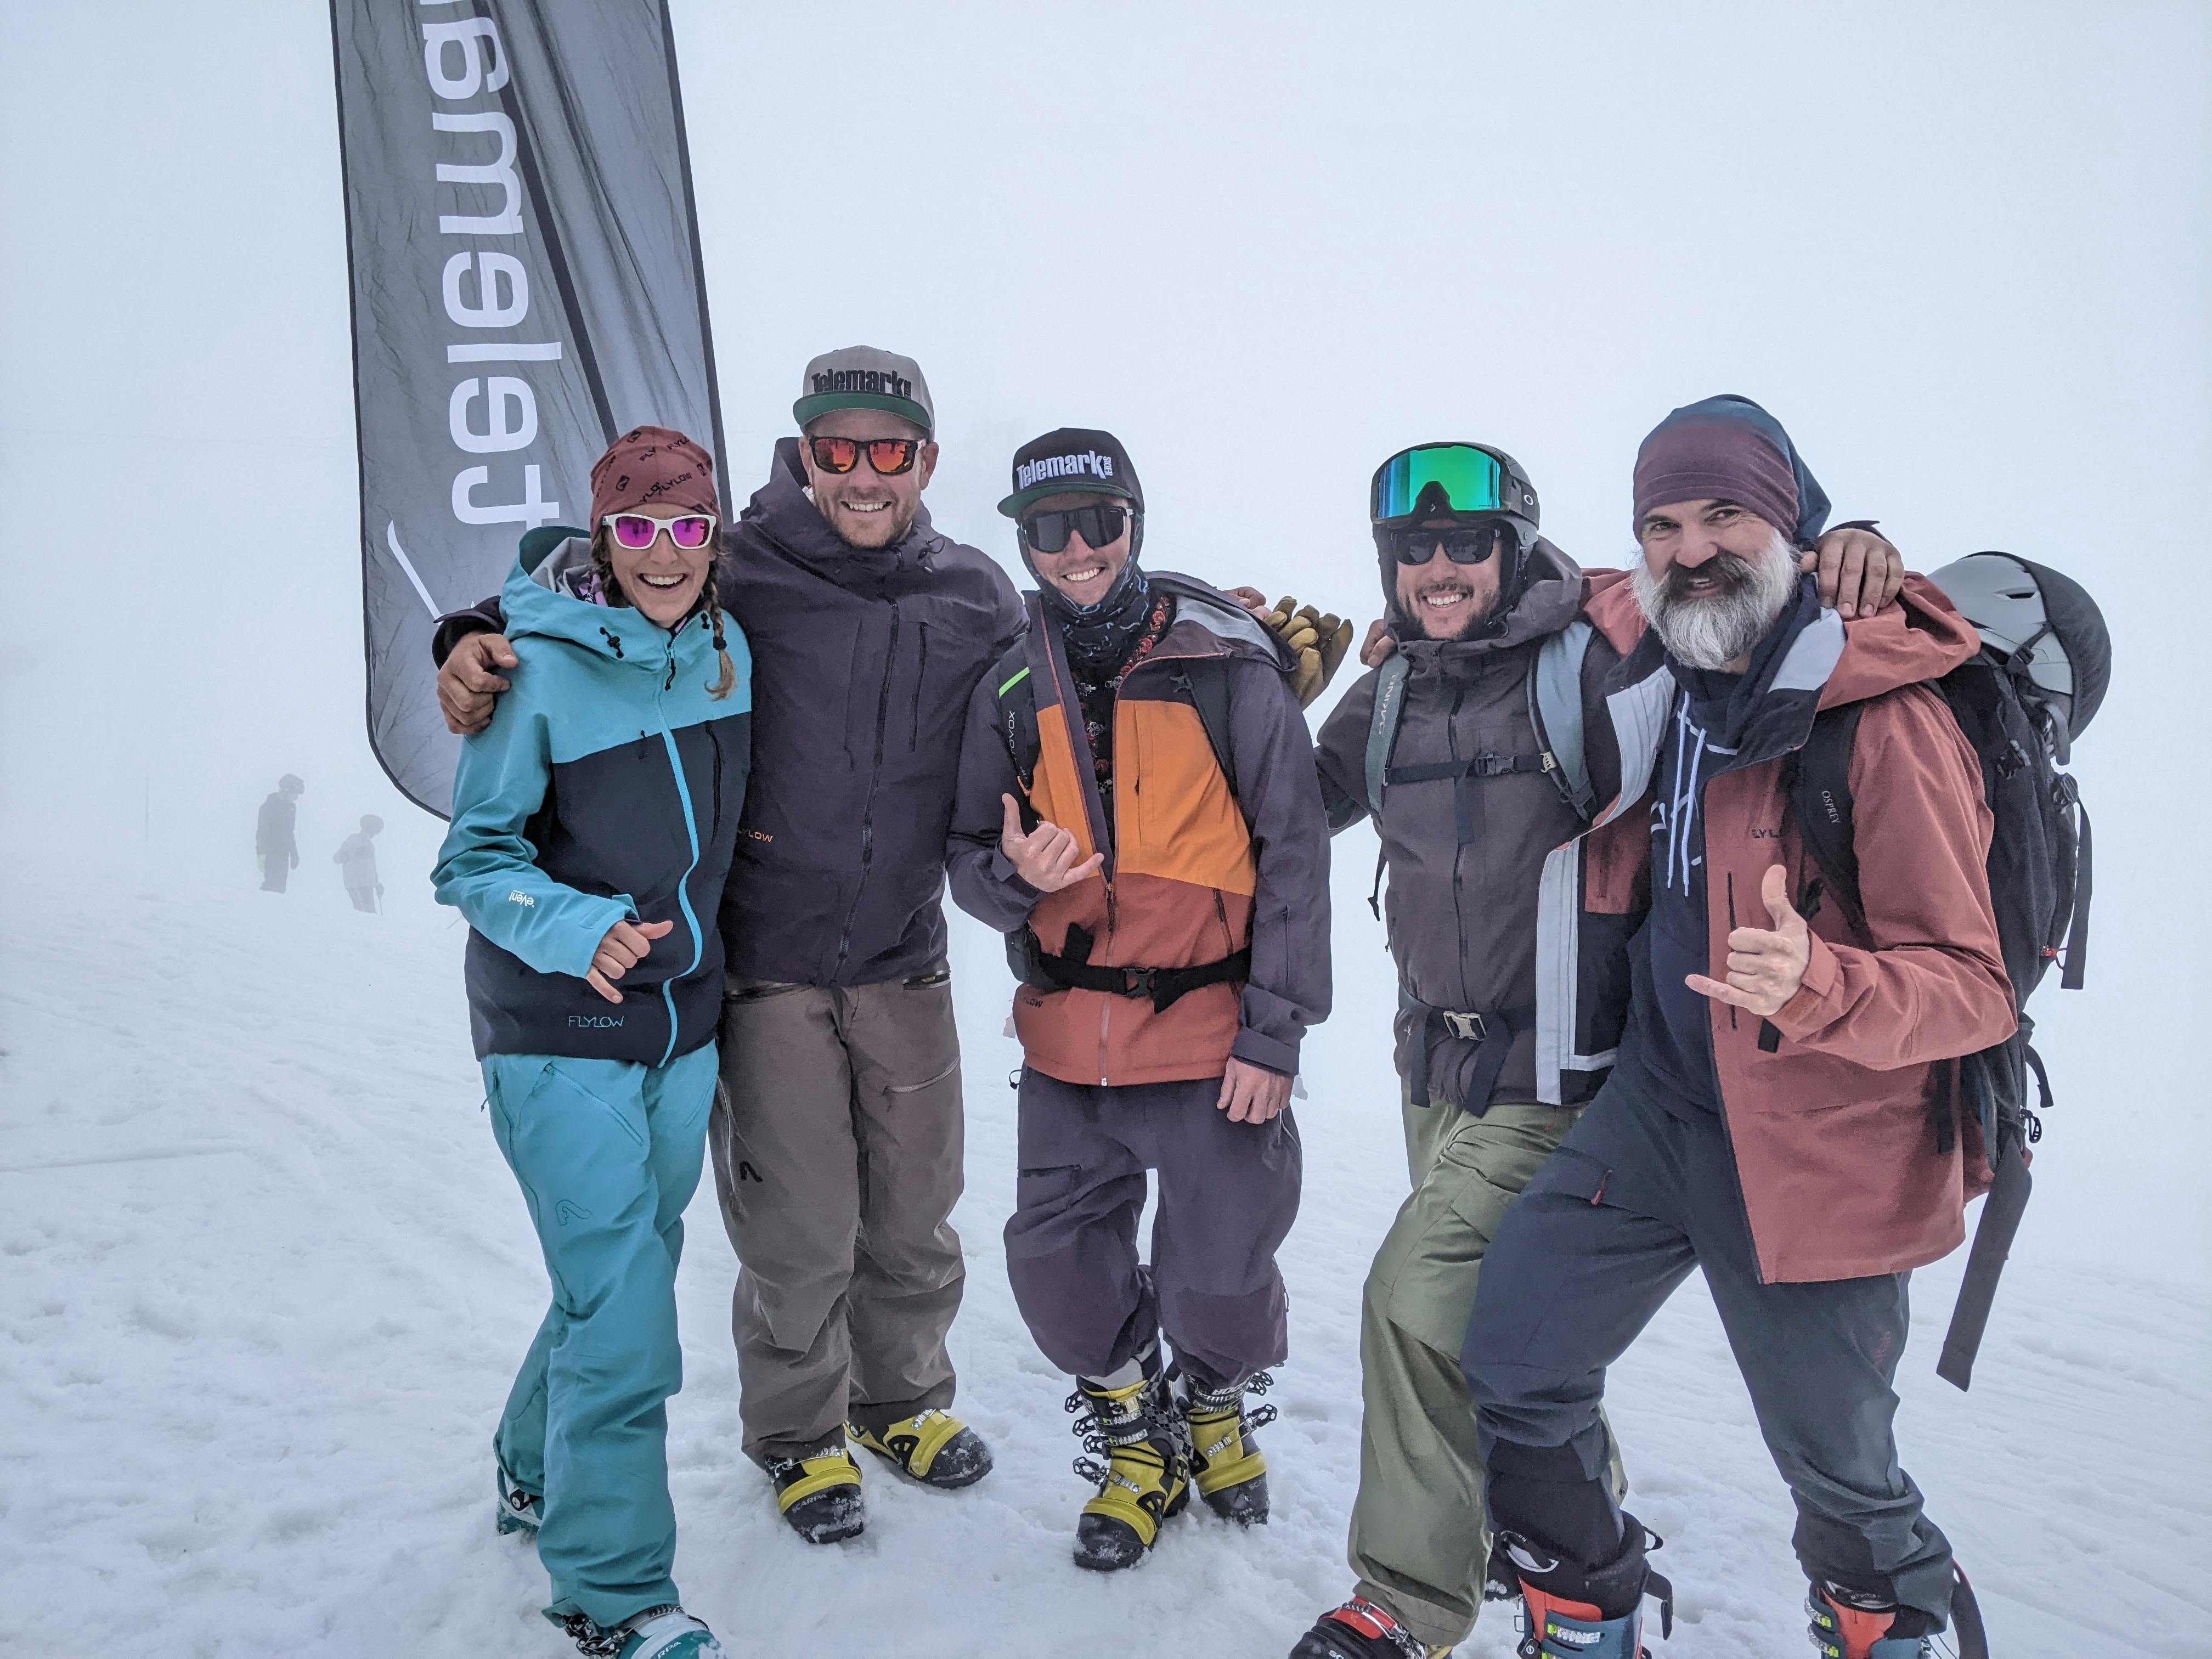 Five people wearing ski gear all hug each other and pose for a picture. There is snow on the ground. 